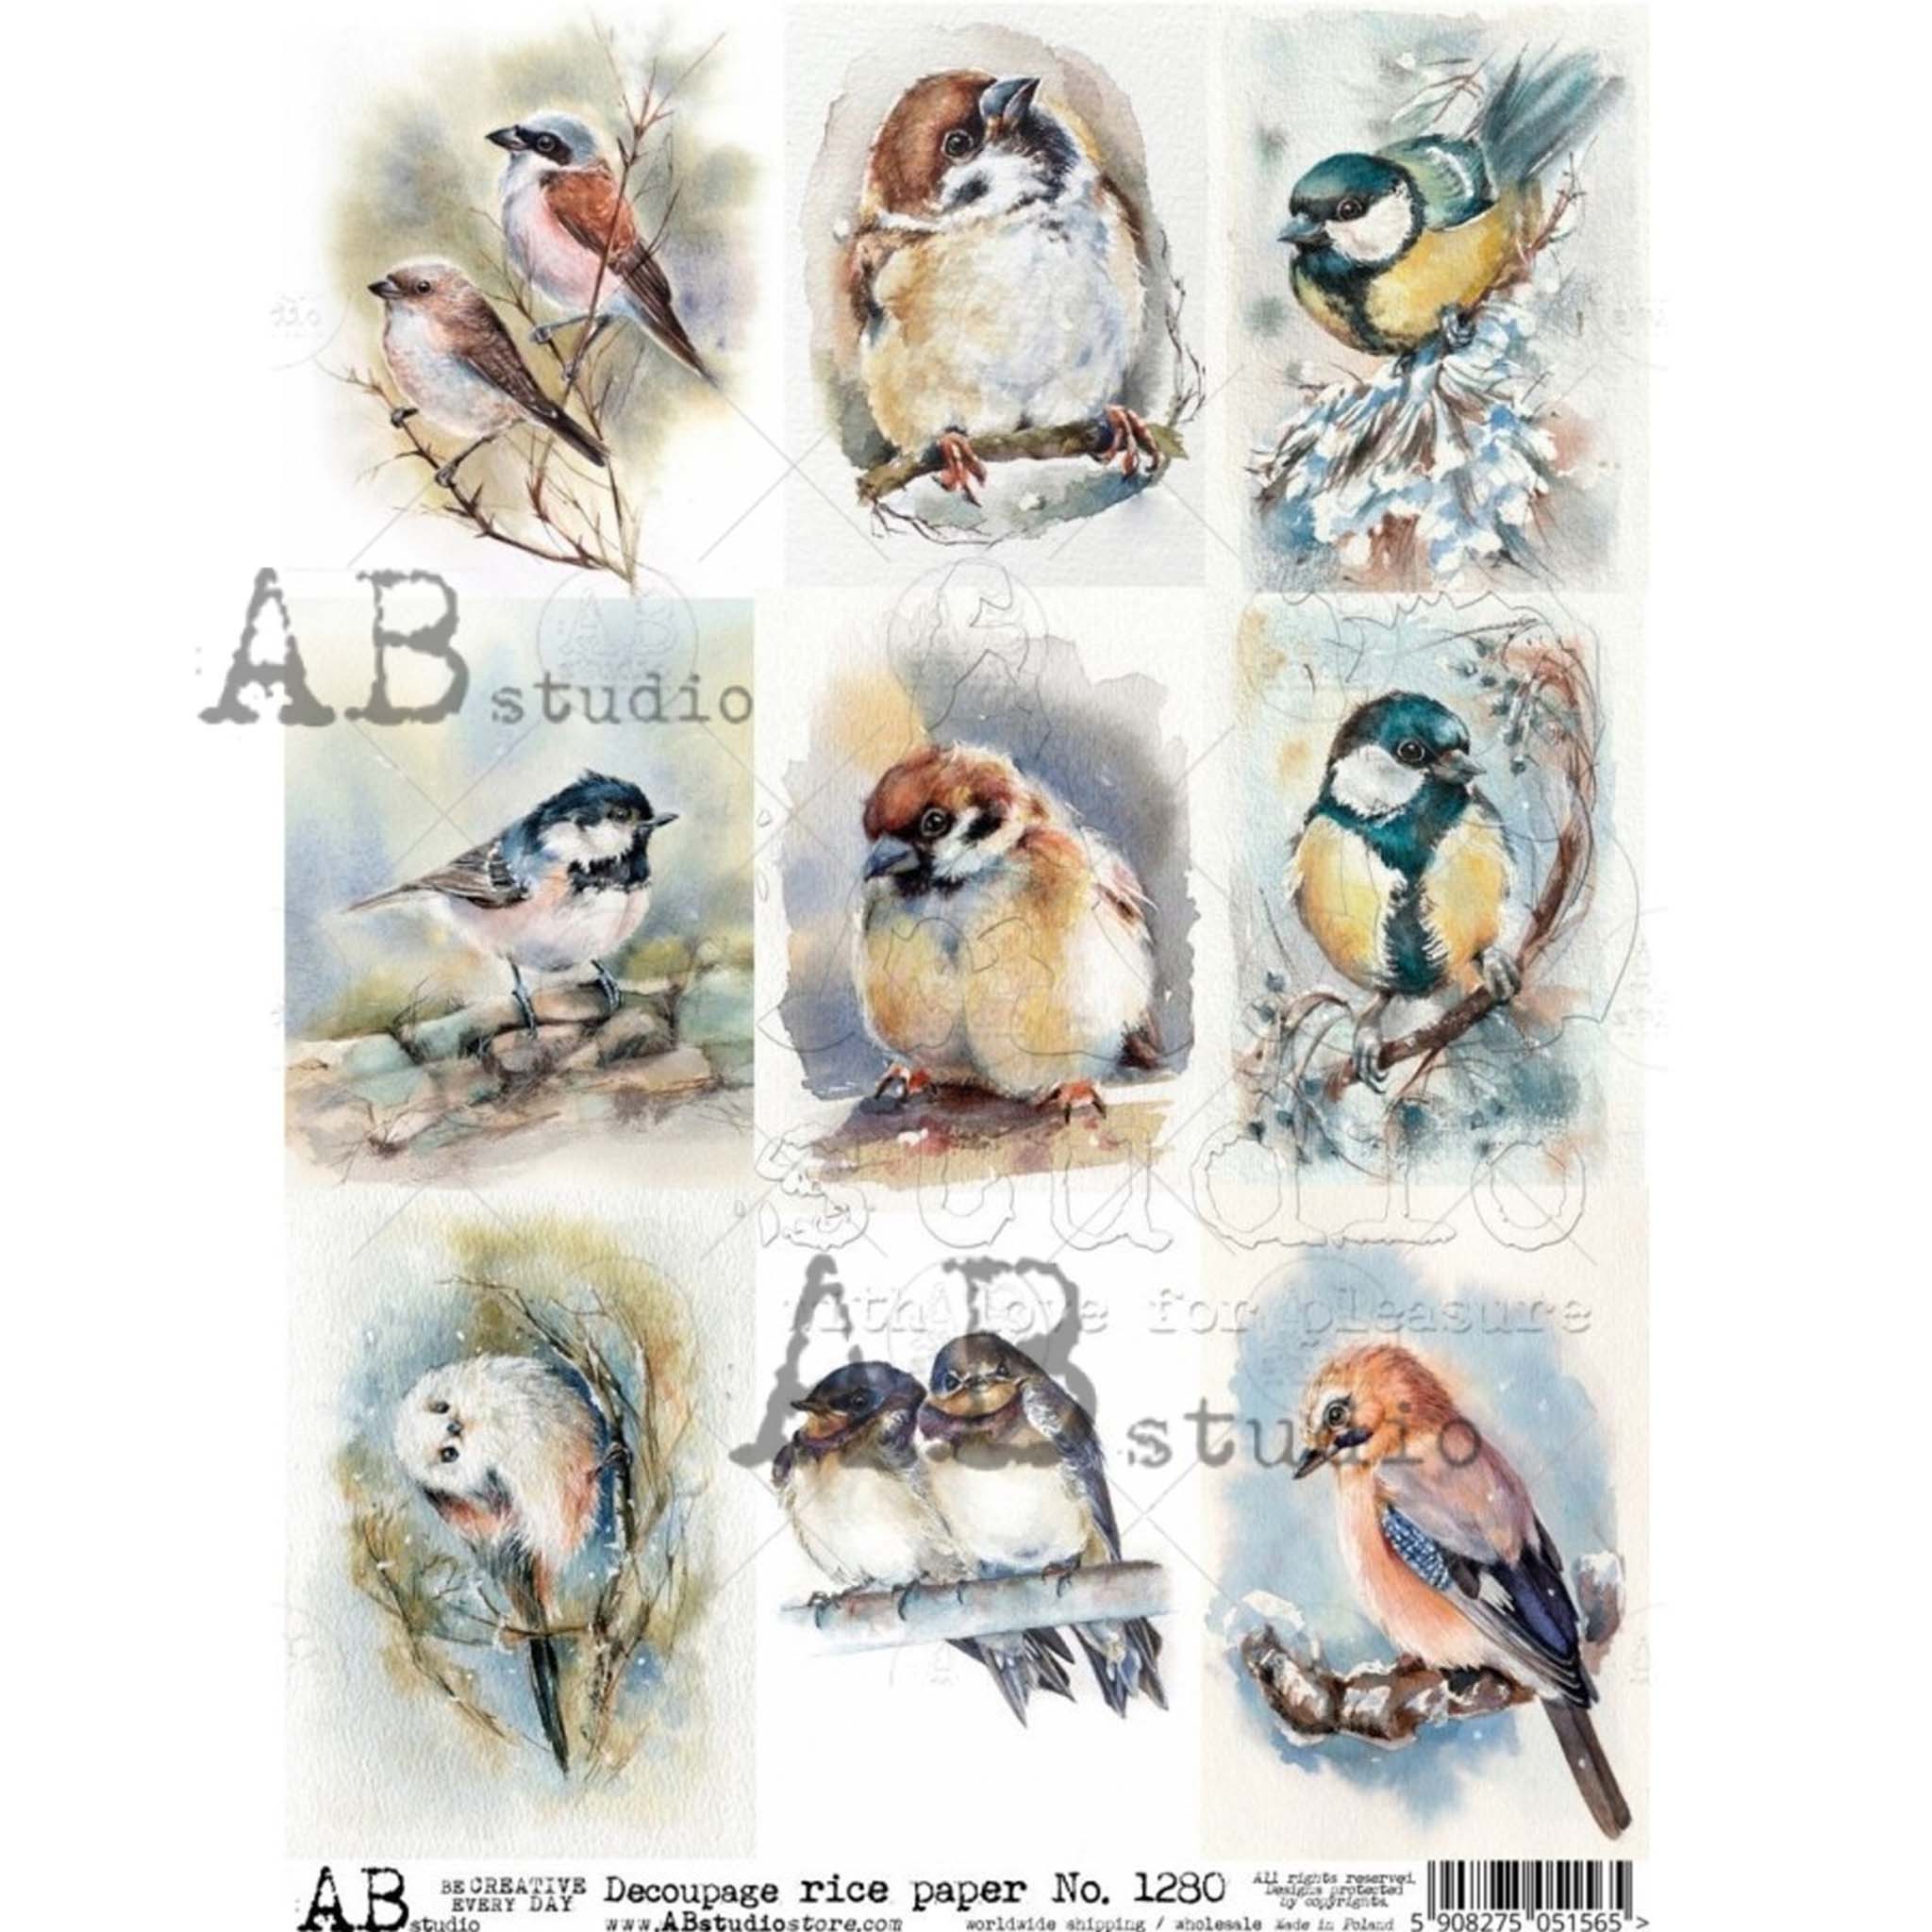 A4 rice paper design of 9 vibrant watercolor bird images against a white background.